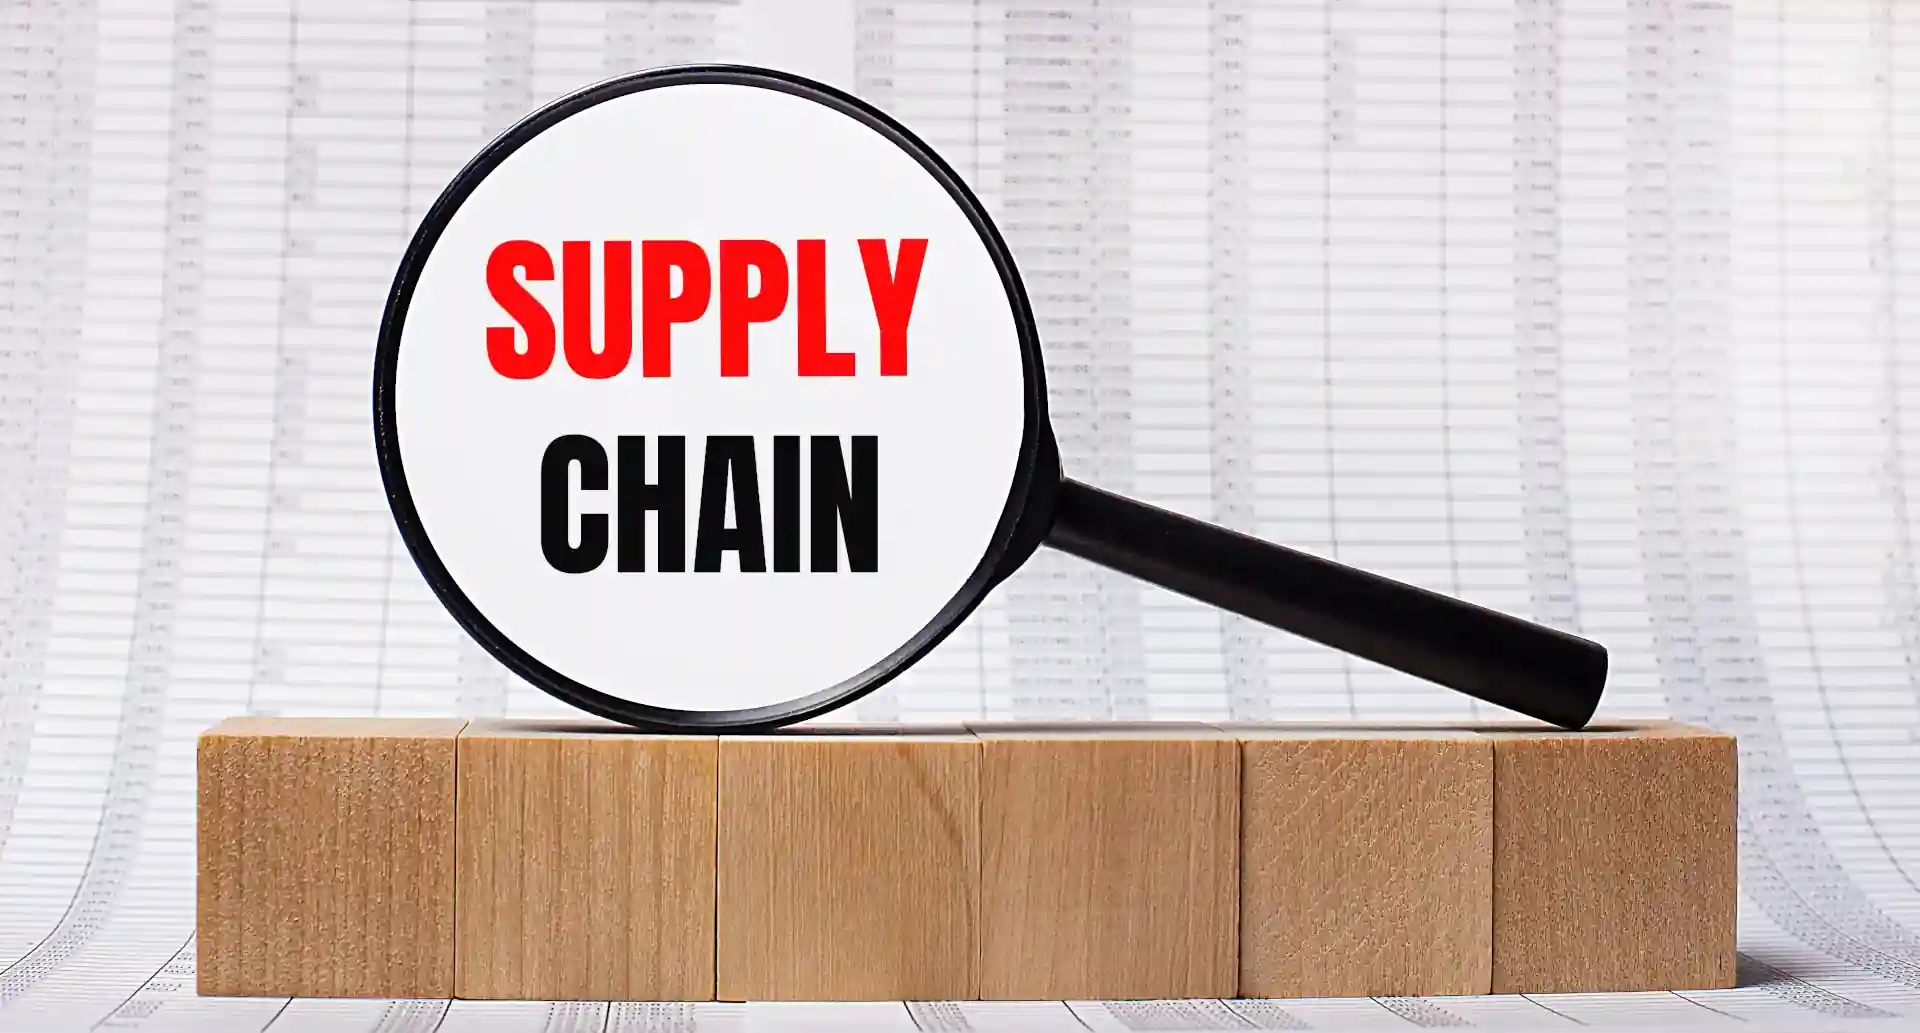 Supply chain issue in cyber security